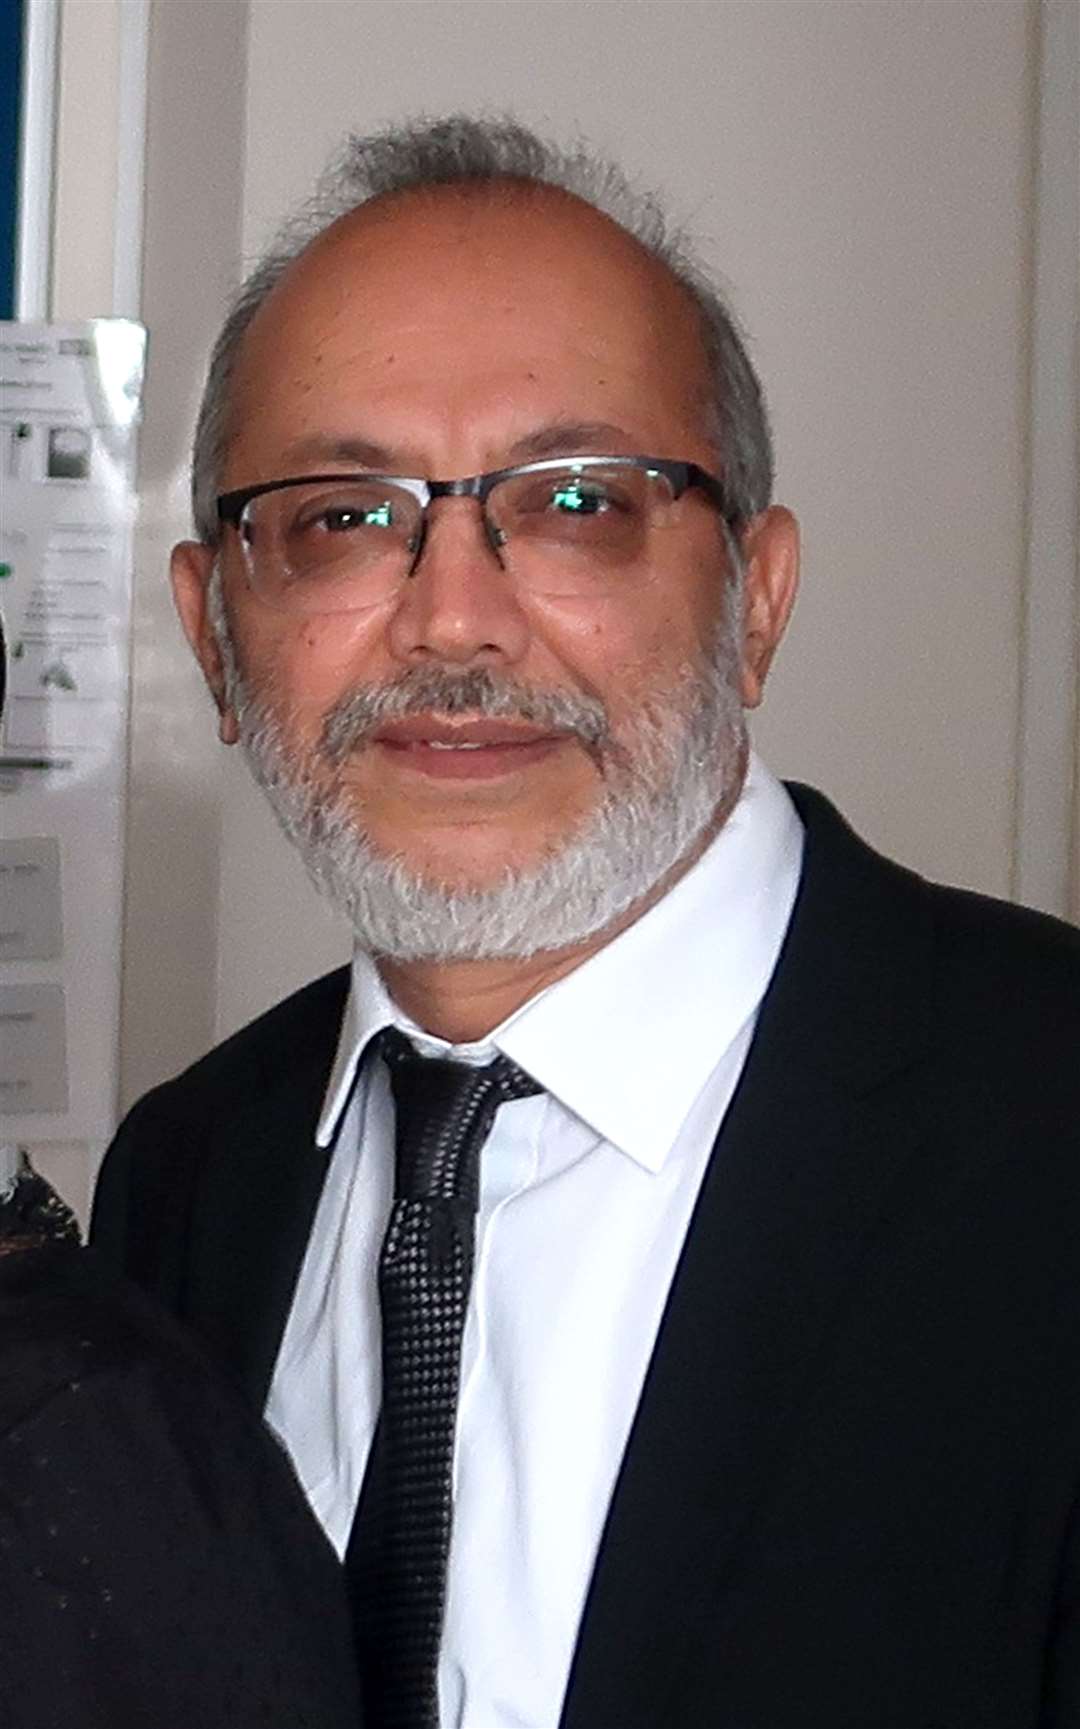 Dr Yusuf Patel, 61, has three children and worked as a GP in Newham for over 30 years.